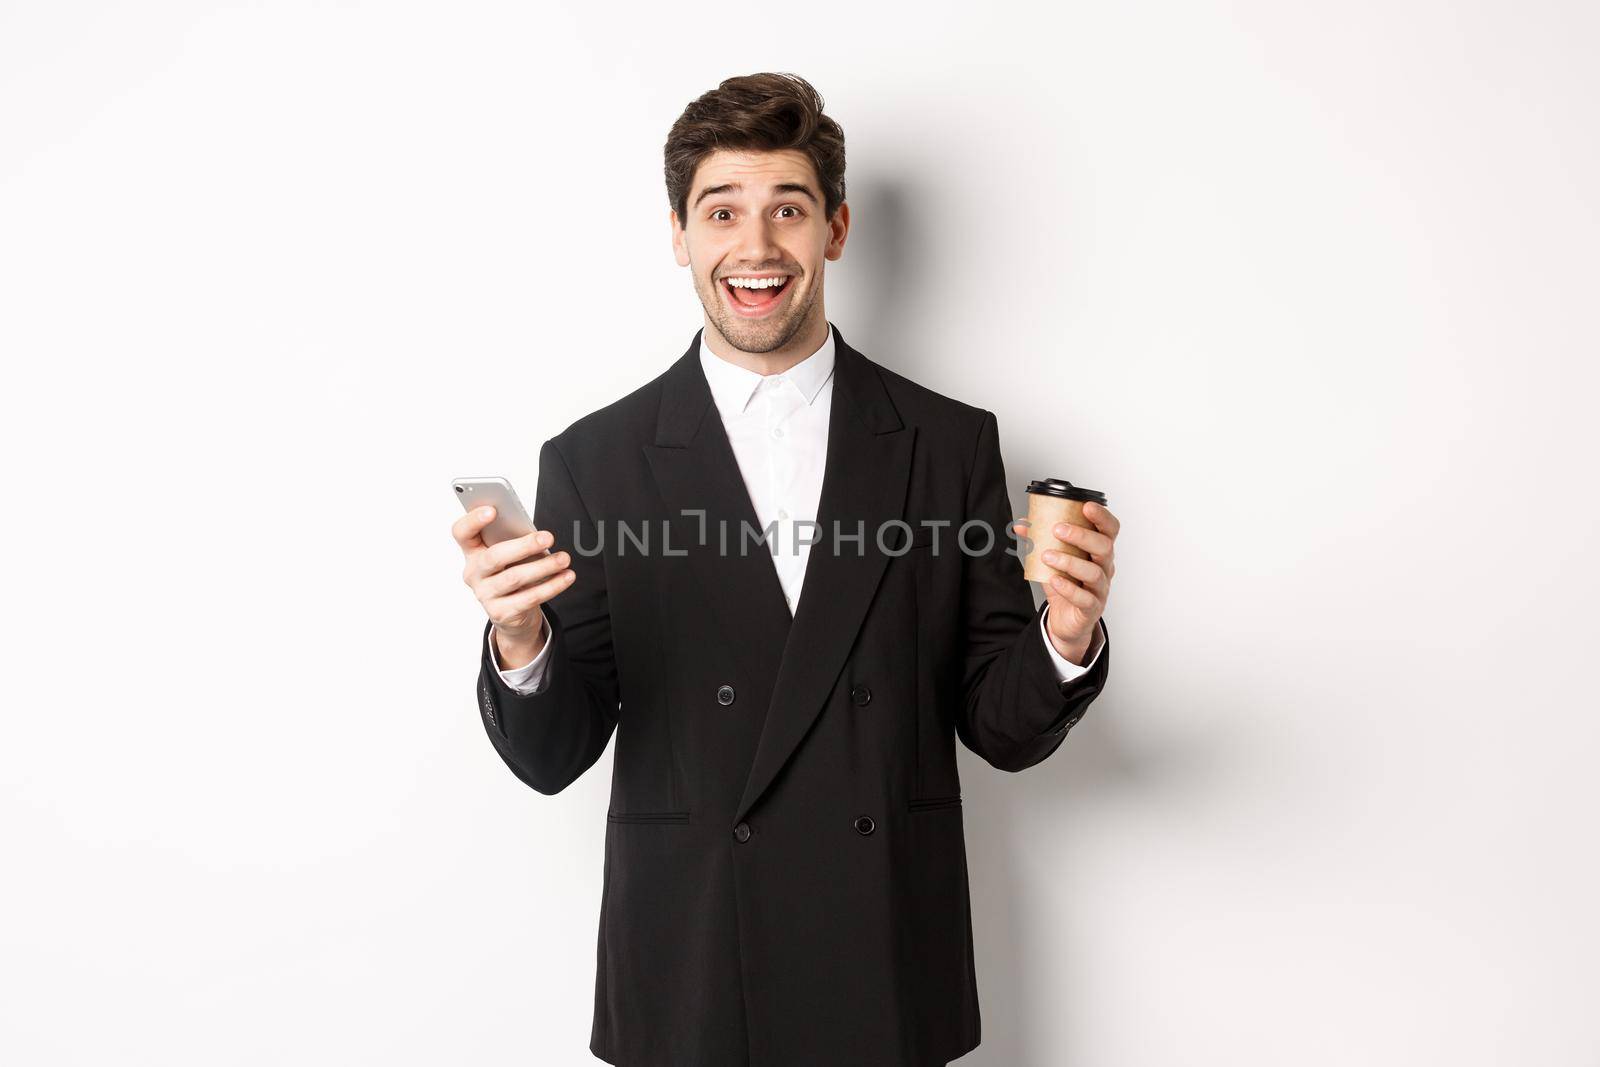 Portrait of happy good-looking man in suit, holding cup of coffee and smartphone, achieve app goal, standing over white background.